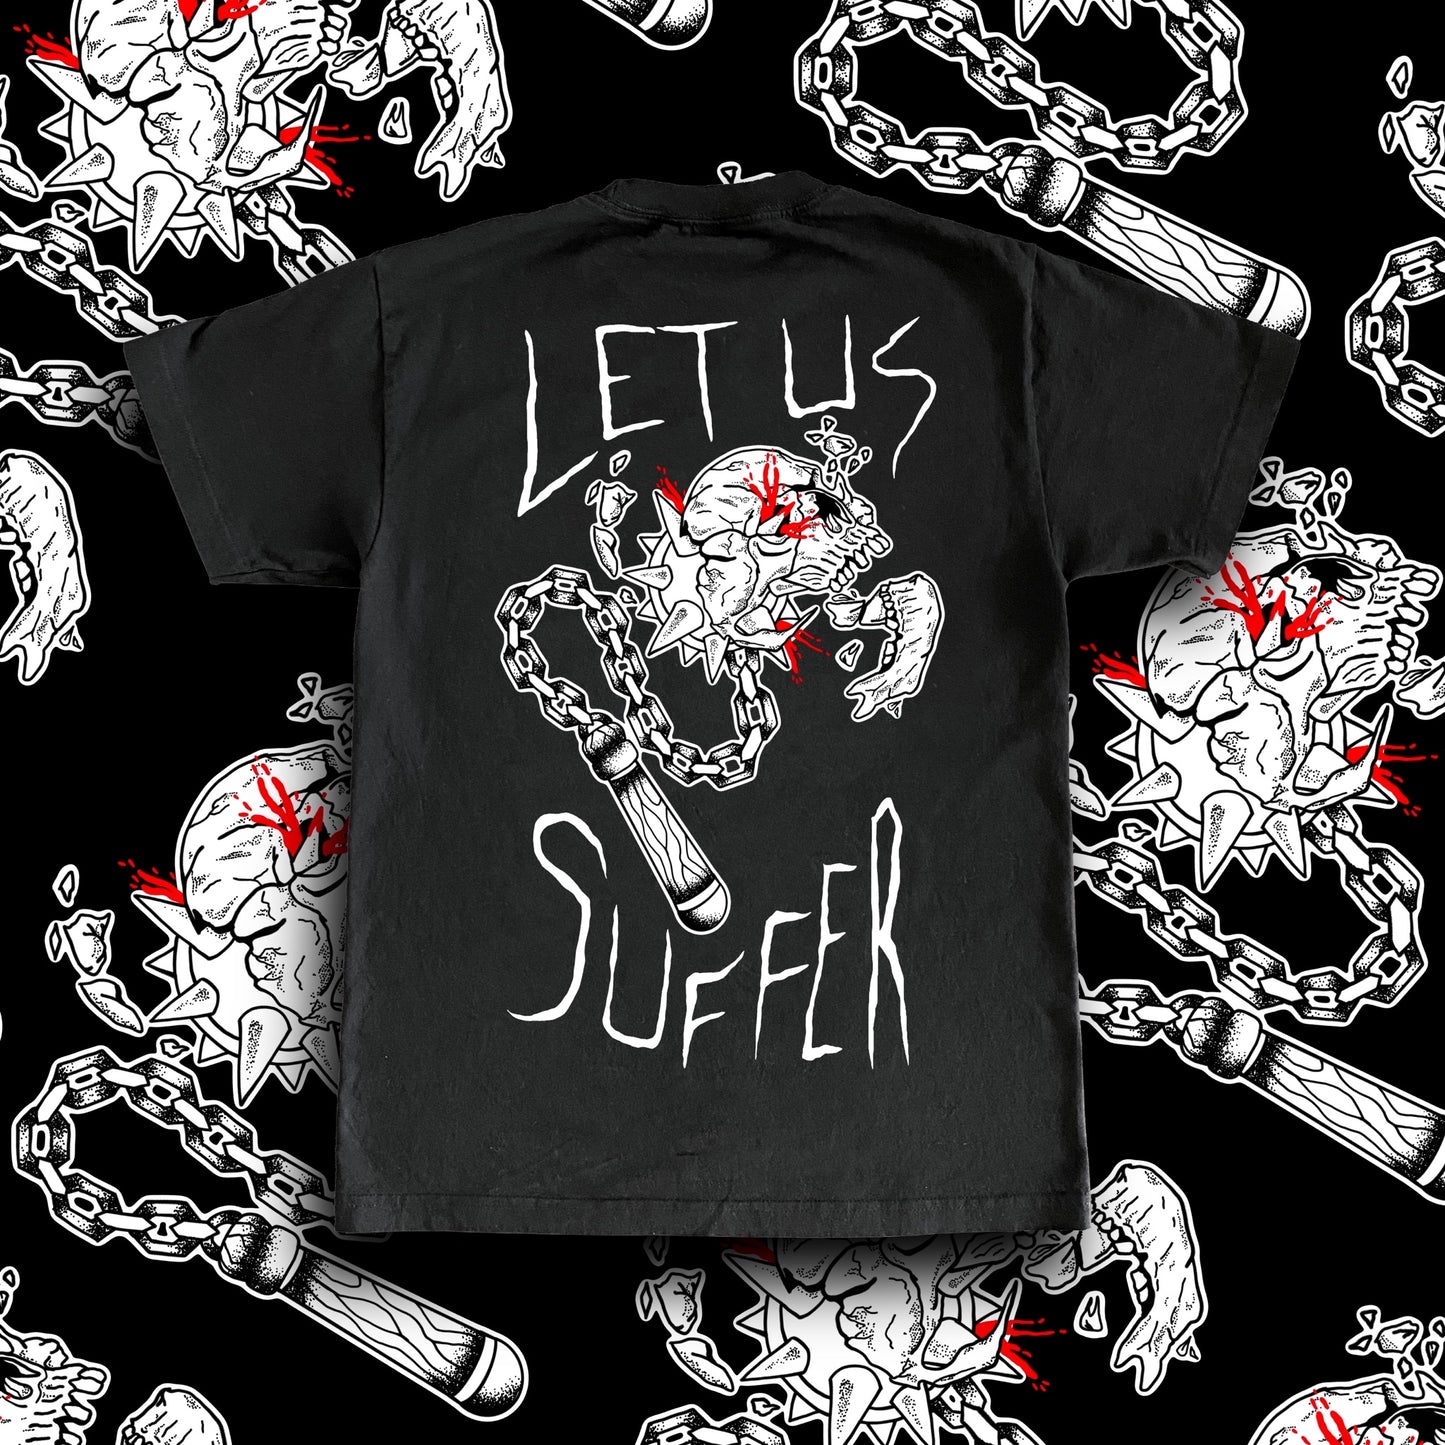 diazable let us suffer shirt